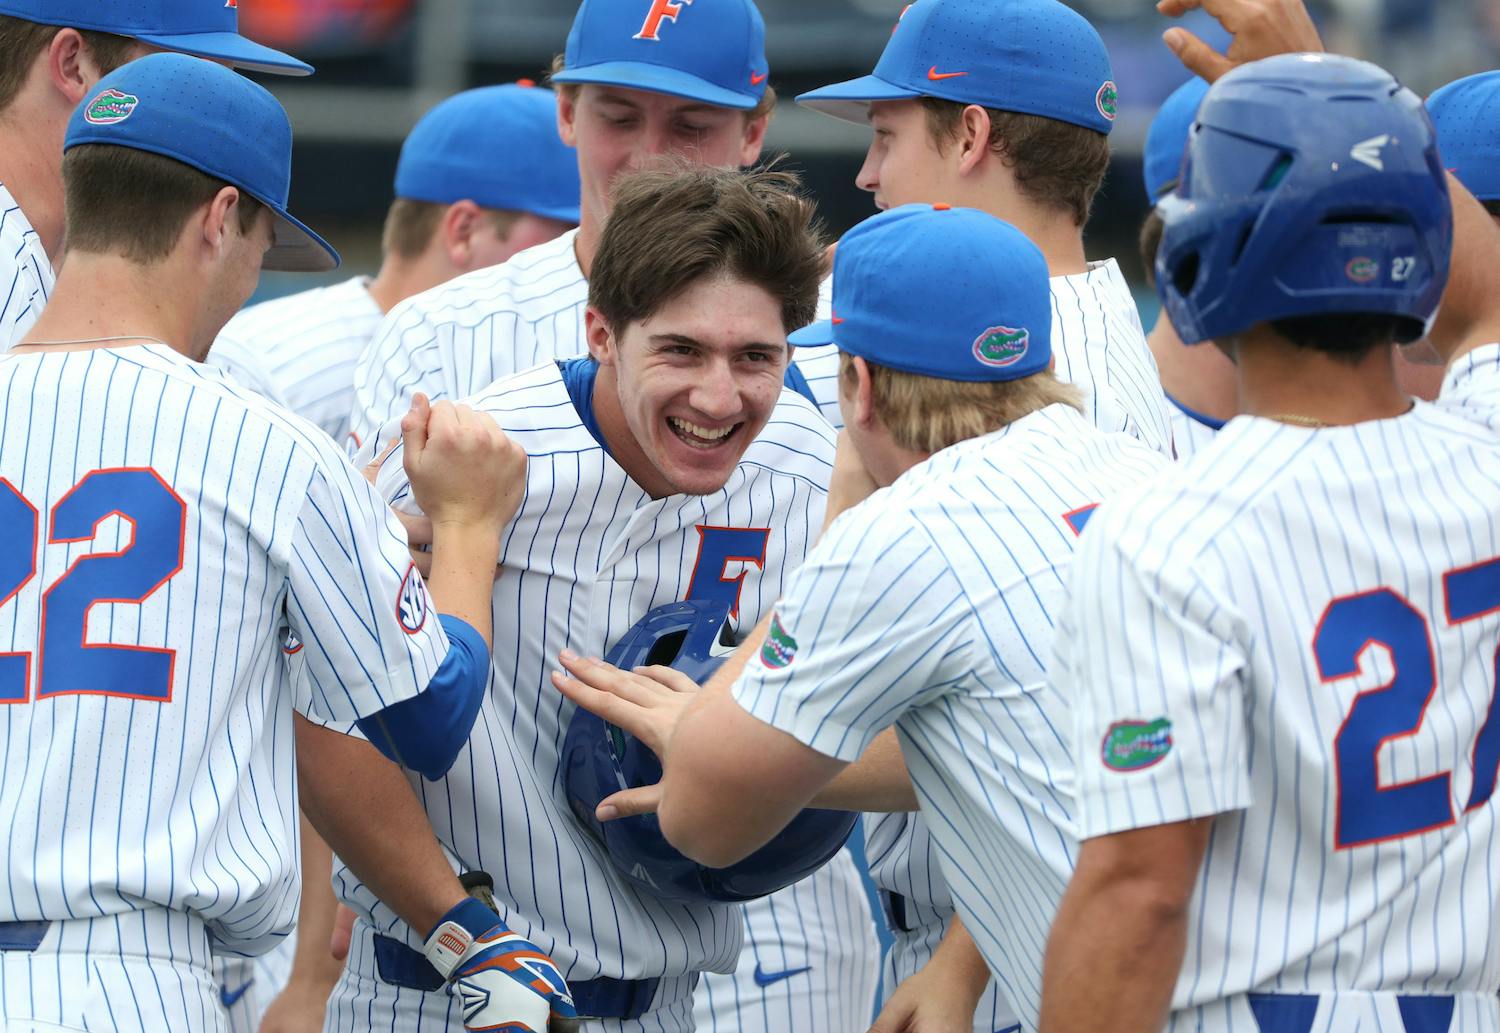 Jacob Young extended his hitting streak to 24 as UF defeated Sanford 8-4.